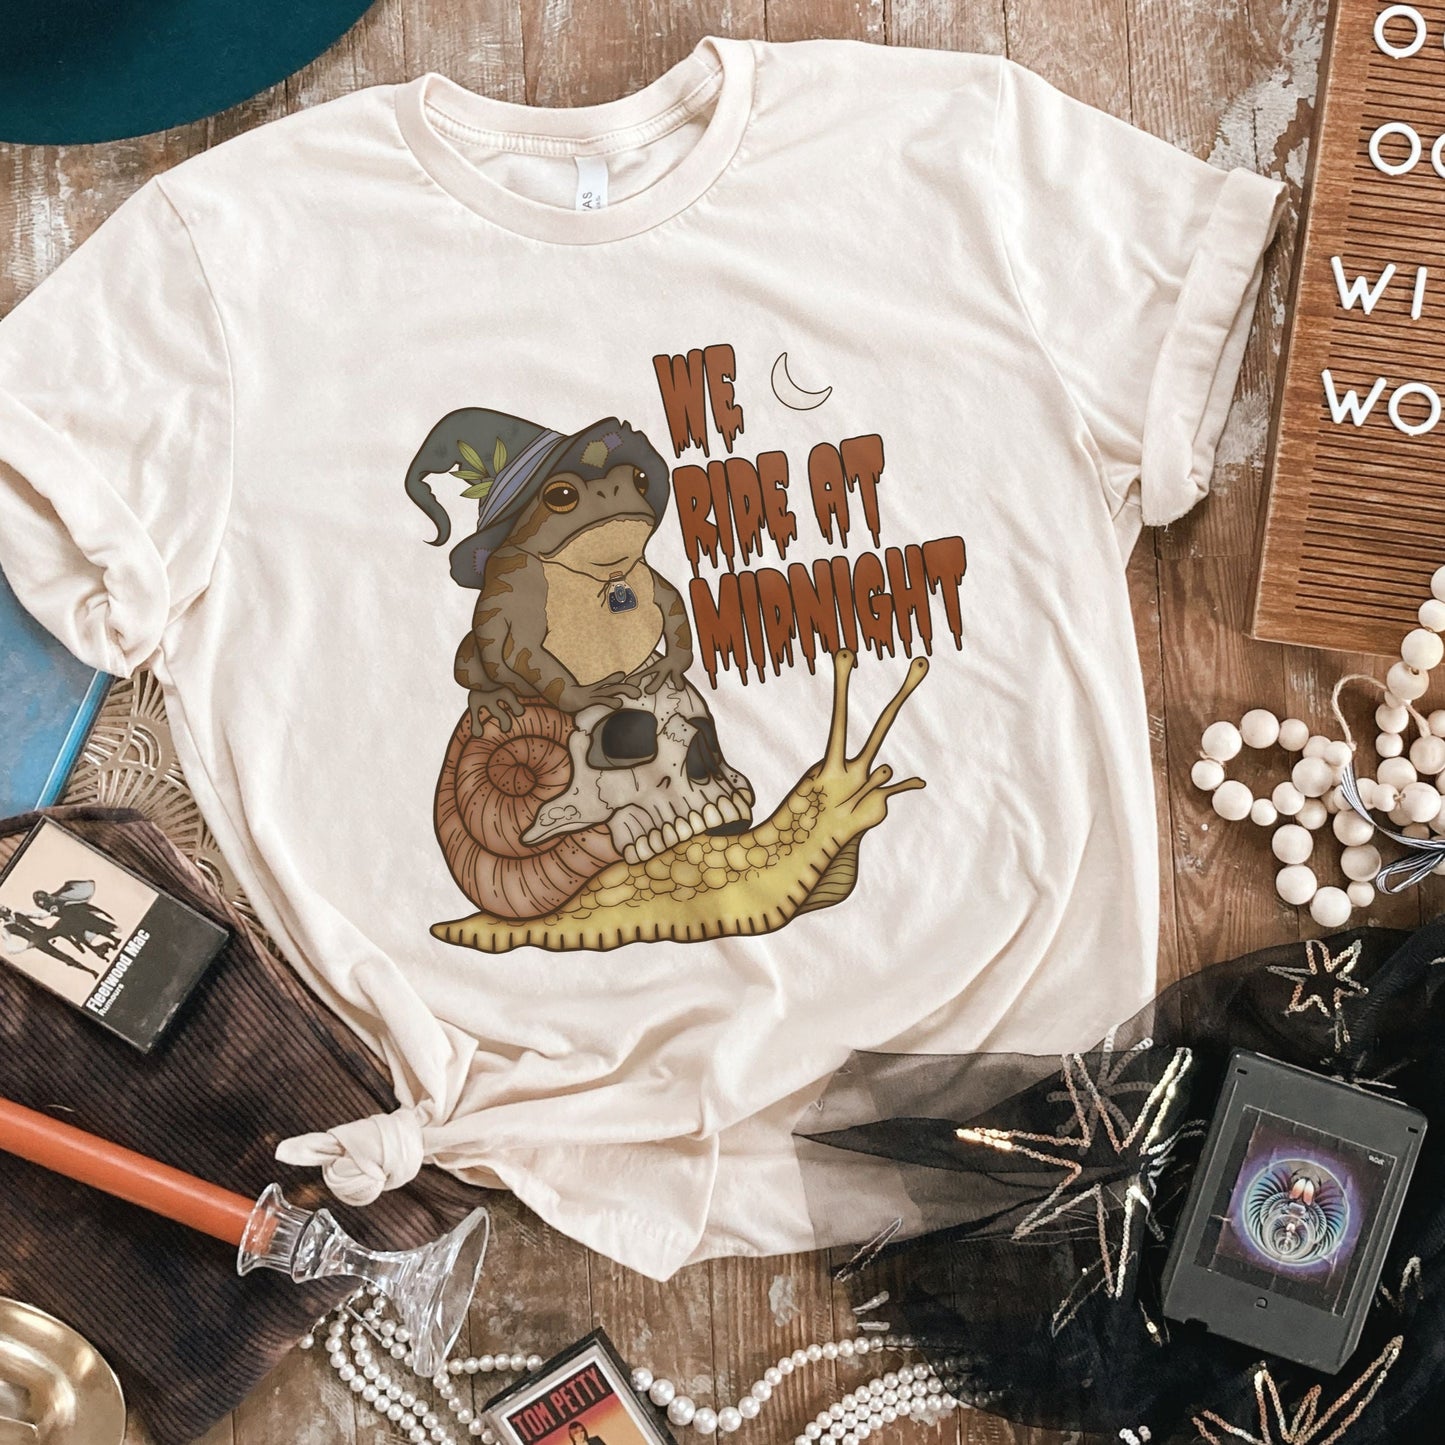 Witchy Swamp Witch Unisex T-Shirt. Frog Riding a Snail. We ride at midnight. Esdee Designs